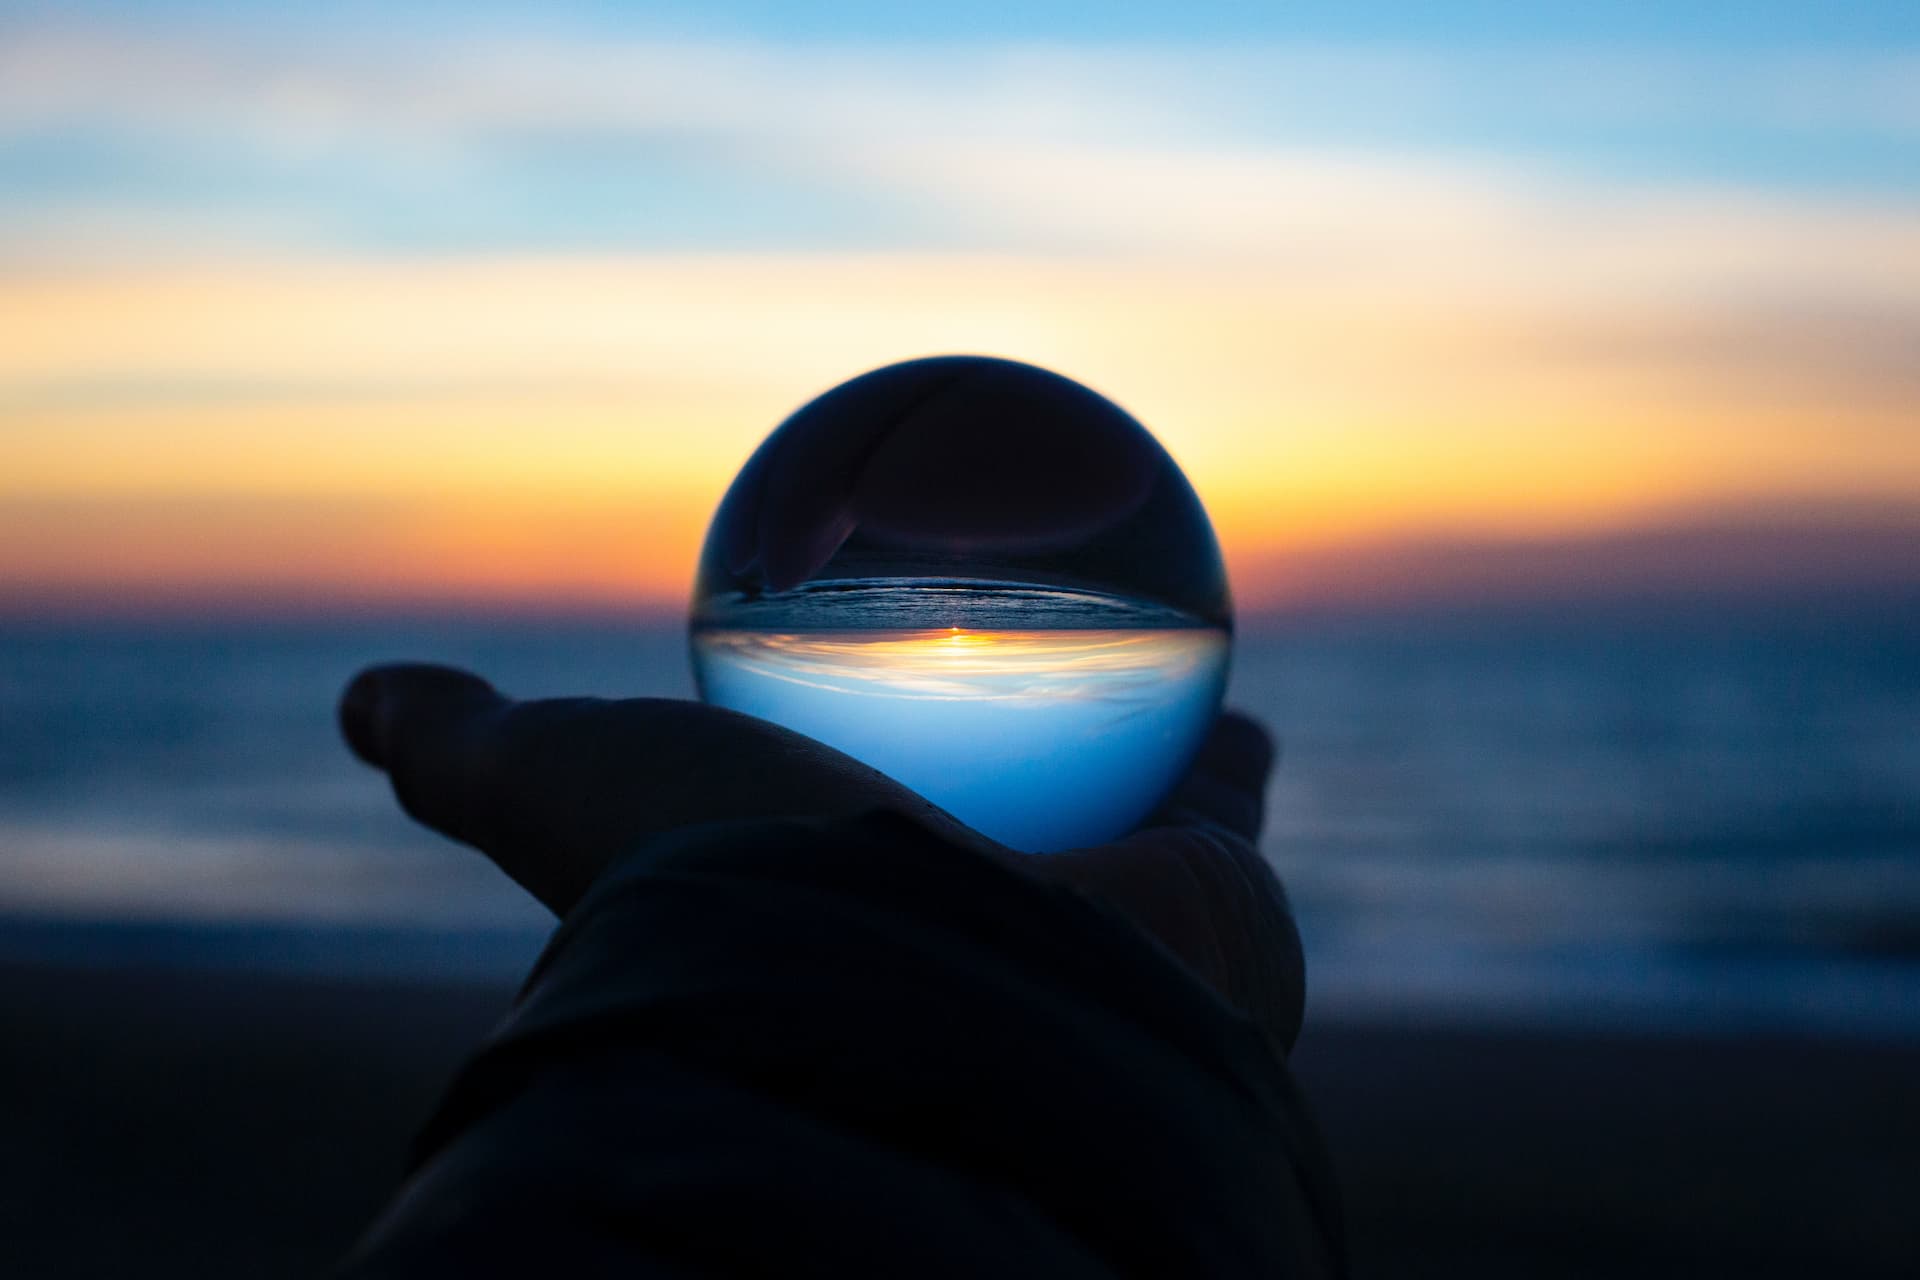 Image of a glass ball in the palm of a hand